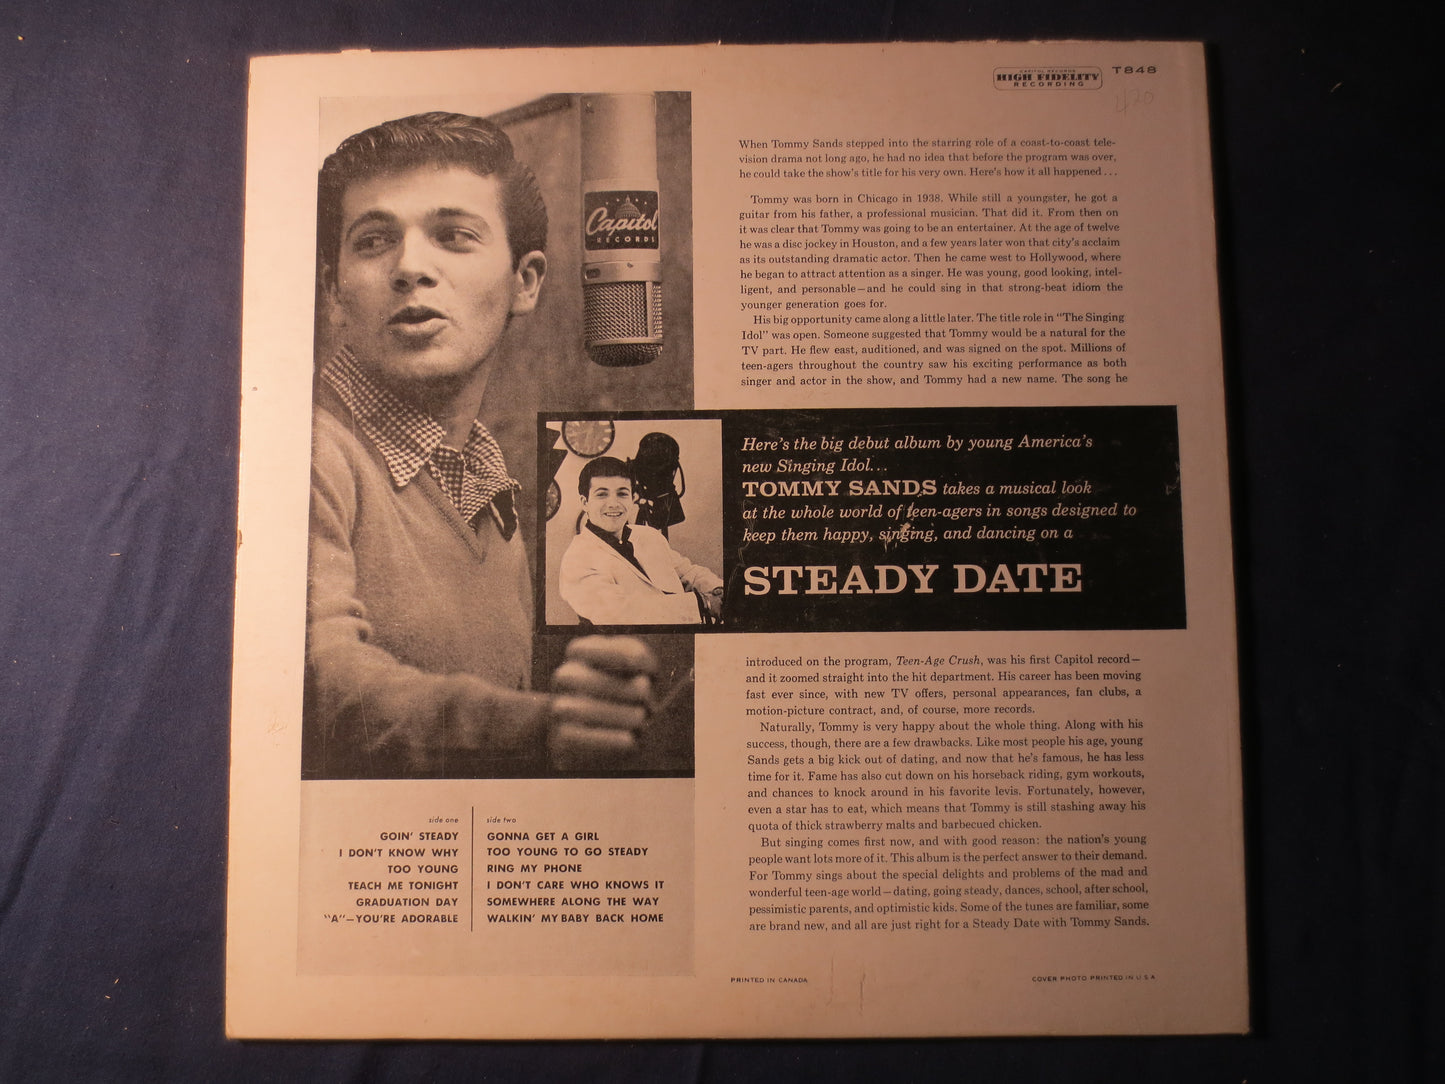 TOMMY SANDS, 1st Records, Steady Date, Tommy Sands Record, Tommy Sands Album, Tommy Sands Lp, Vinyl Records, 1957 Records